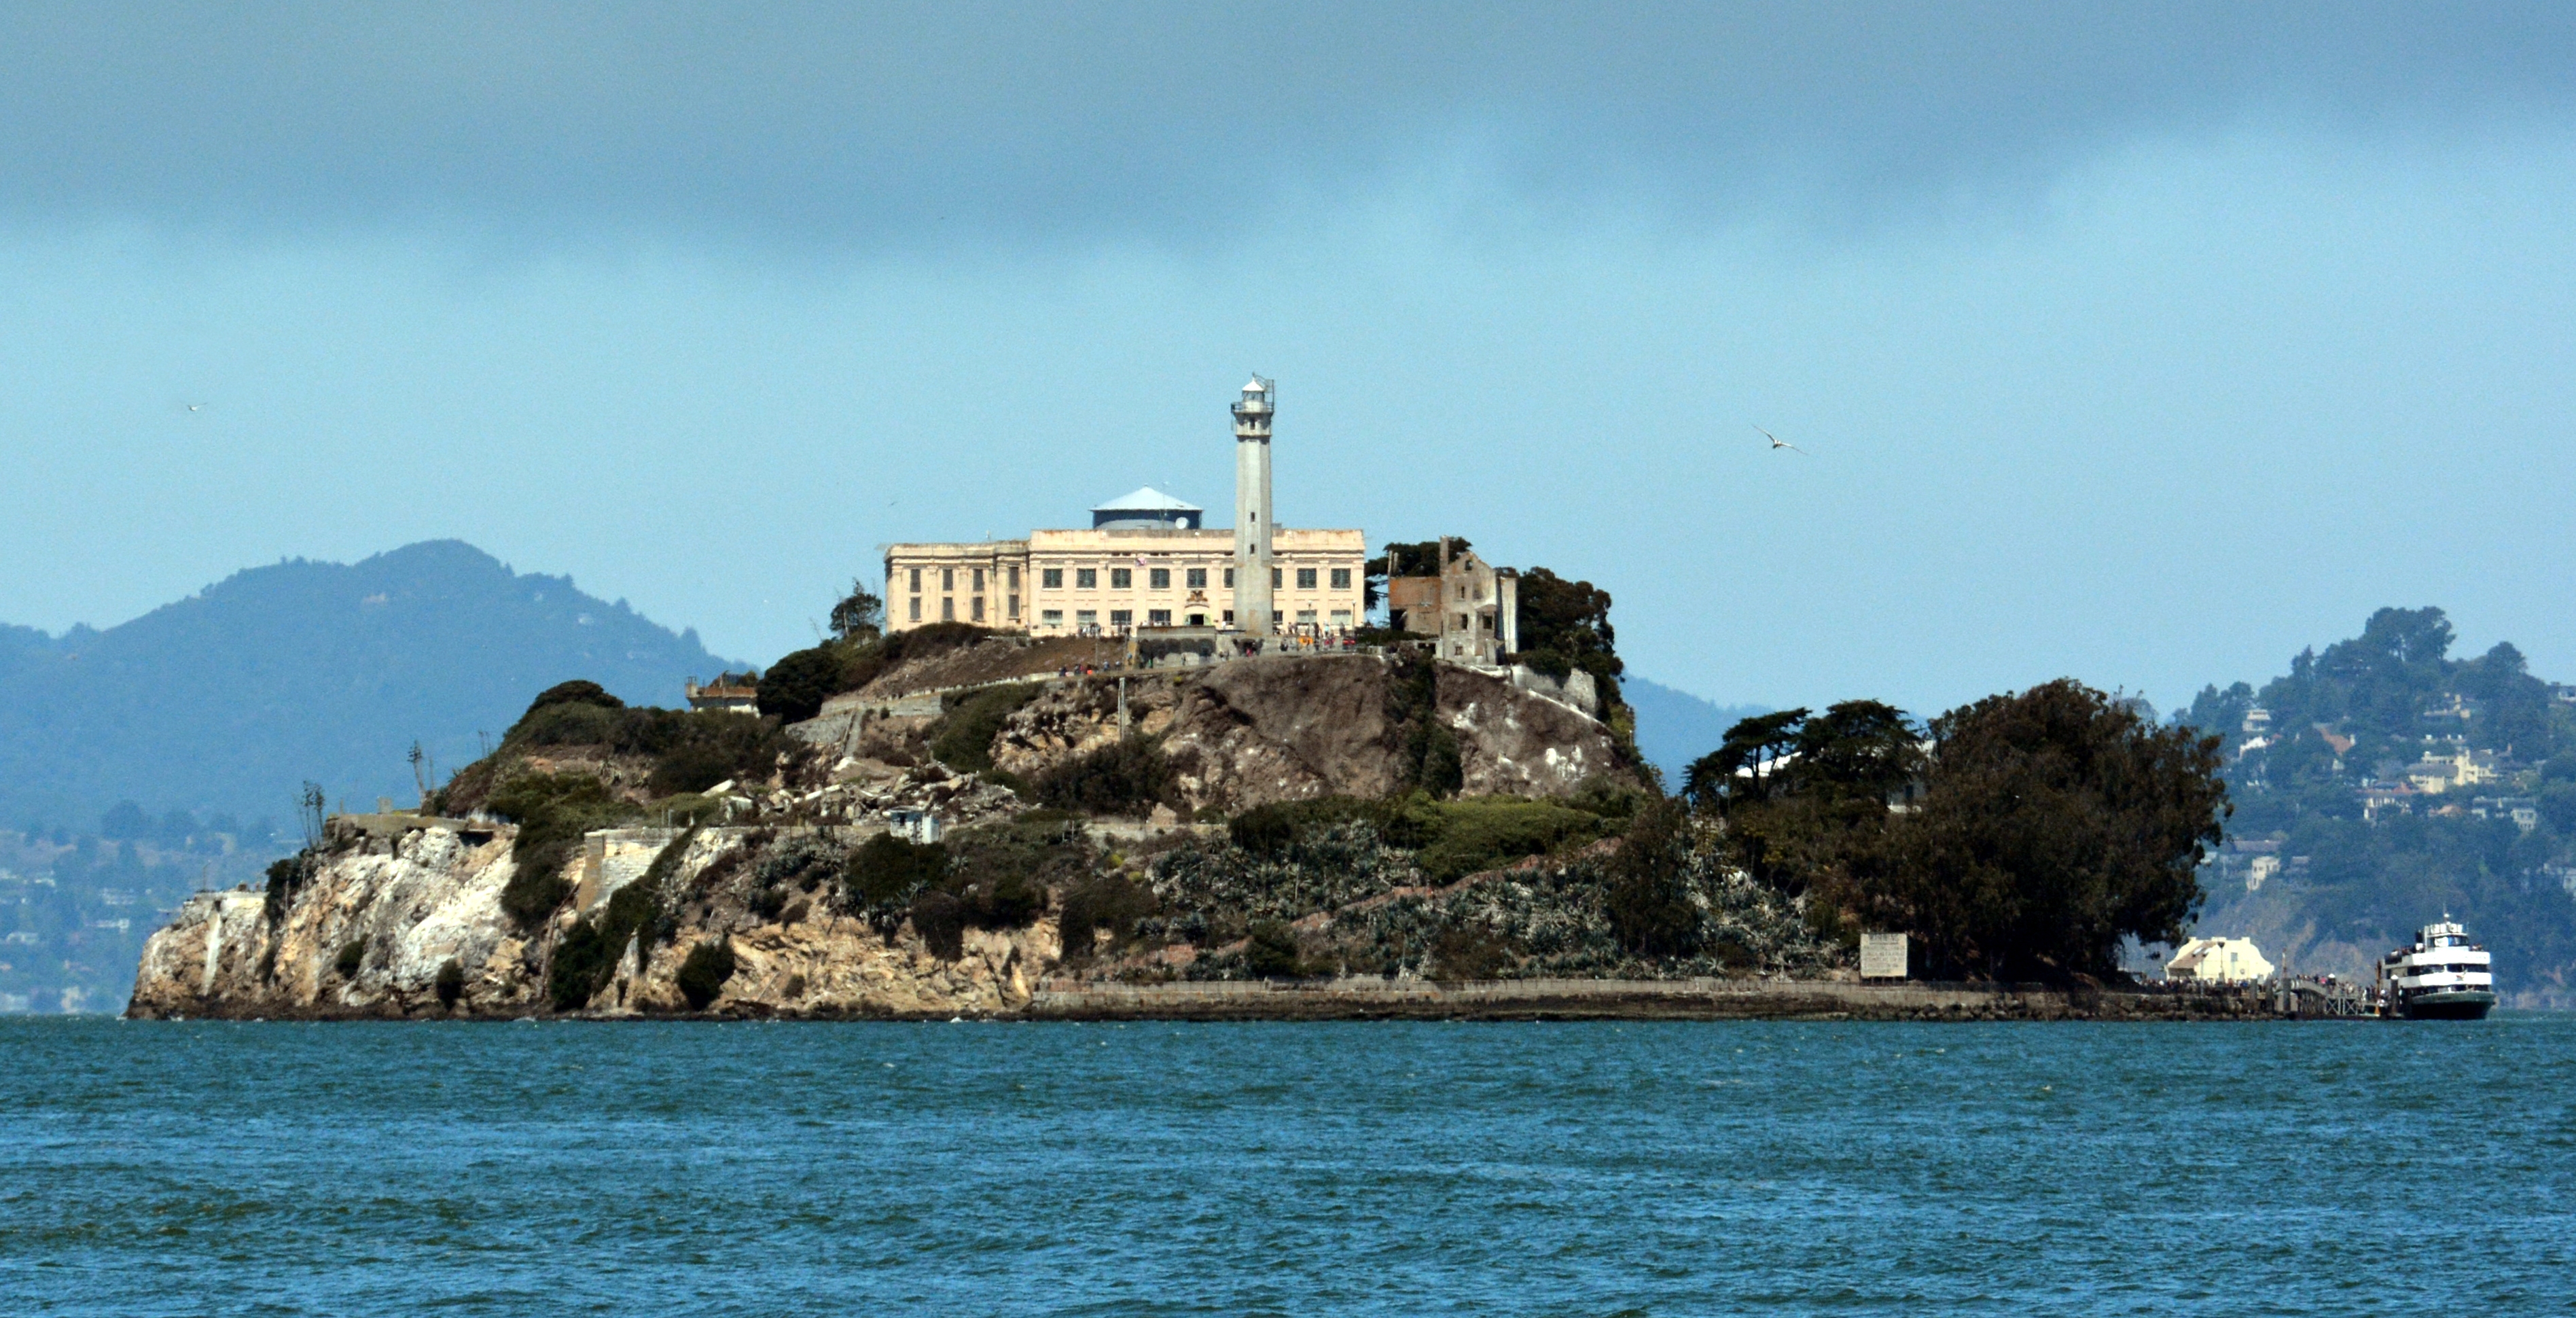 9-year-old sets record swimming to Alcatraz and back